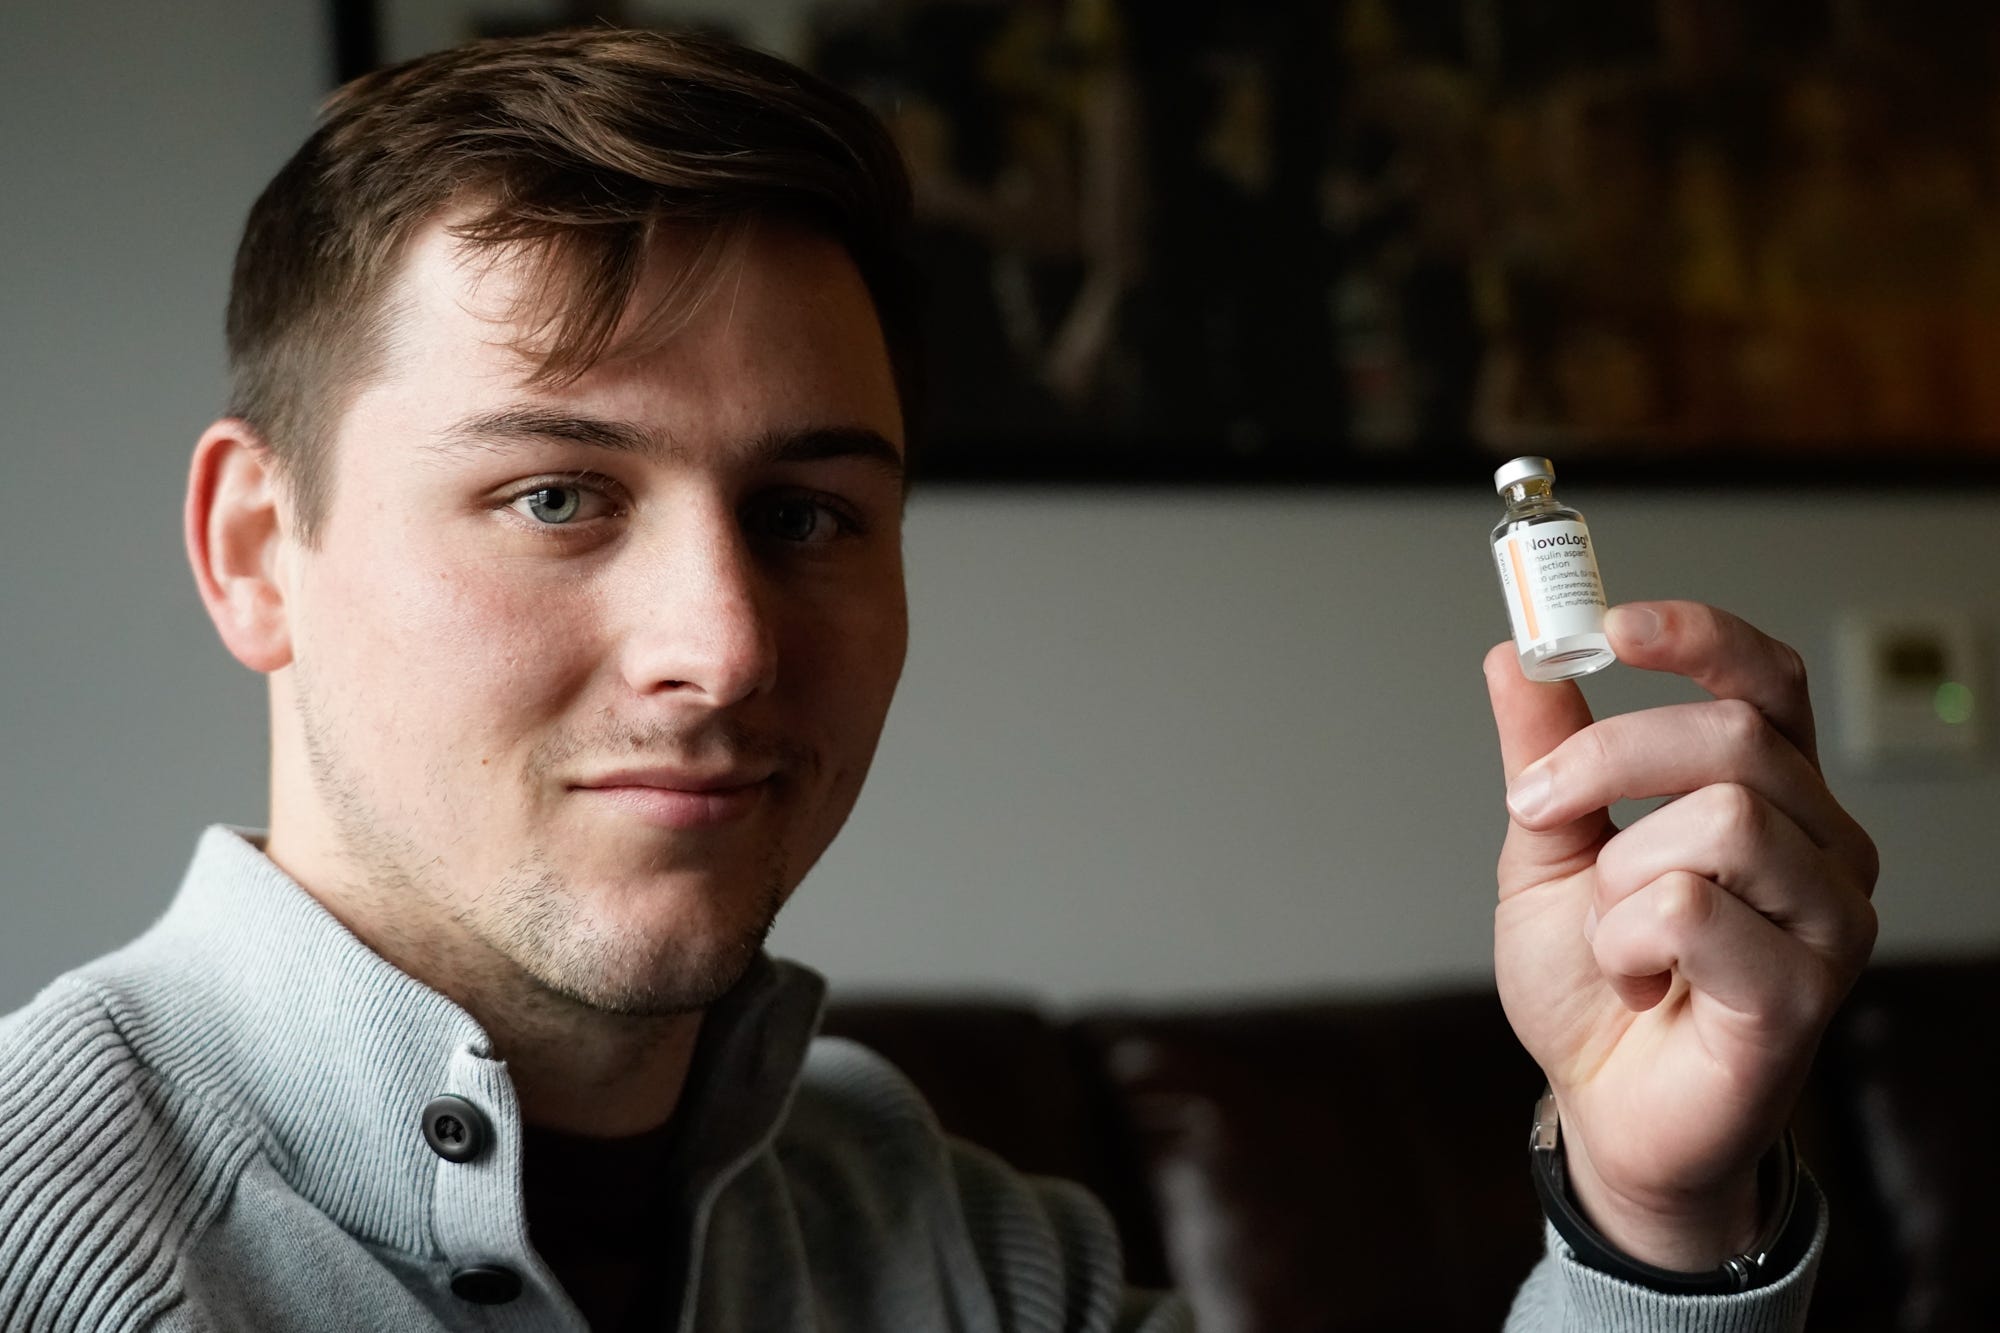 Hunter Sego, who has Type 1 diabetes, has rationed insulin in the past due to its high cost.